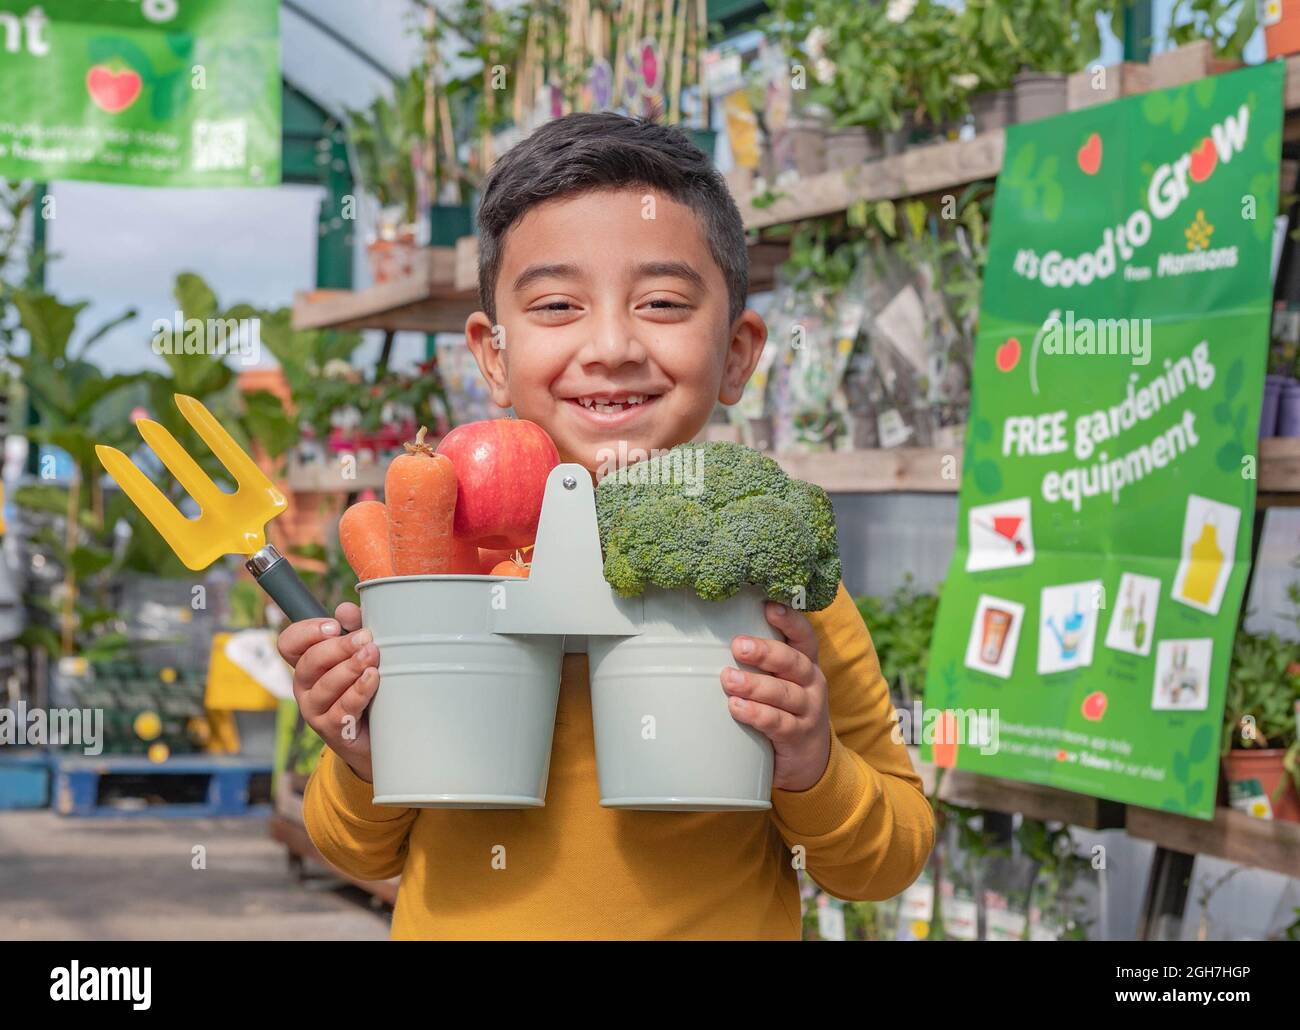 EDITORIAL USE ONLY Adam Hamidshoot, aged 6 visits Morrisons to launch the 'It's Good to Grow' campaign, which will see the supermarket donate £3.5 million of gardening equipment to schoolchildren across the UK to help to educate them about where their food comes from. Issue date: Monday September 6, 2021. Stock Photo